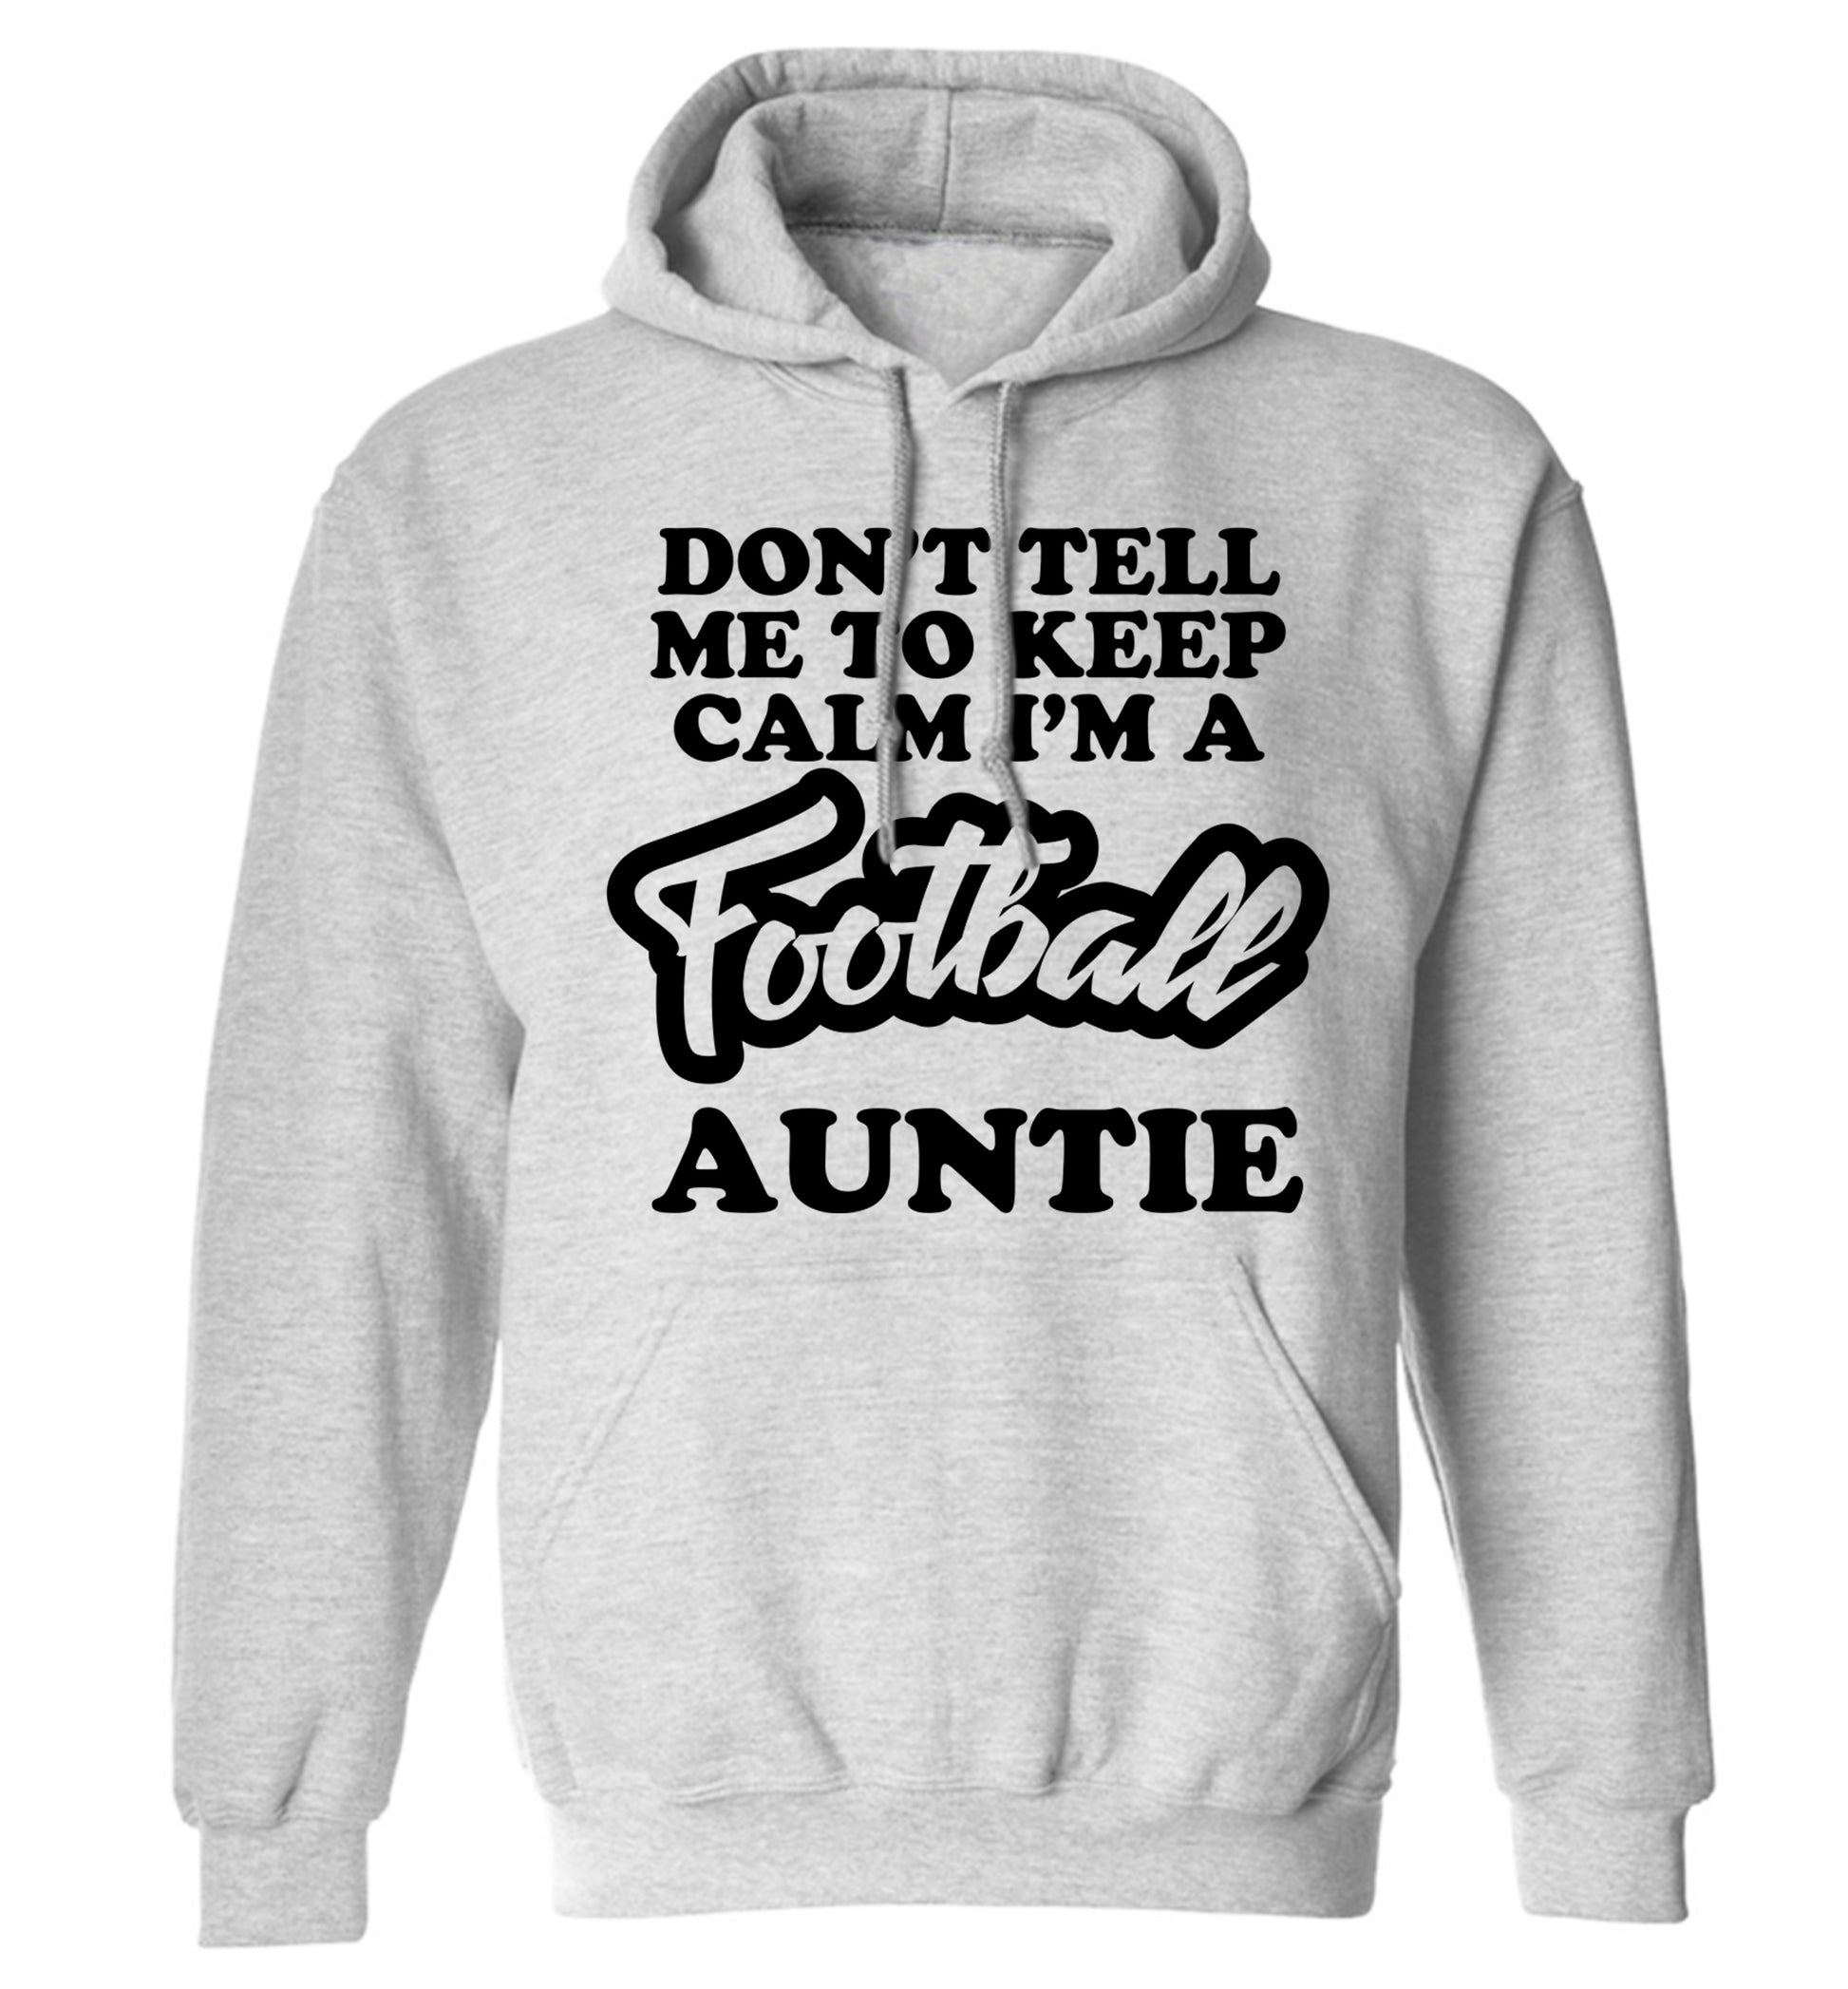 Don't tell me to keep calm I'm a football auntie adults unisexgrey hoodie 2XL